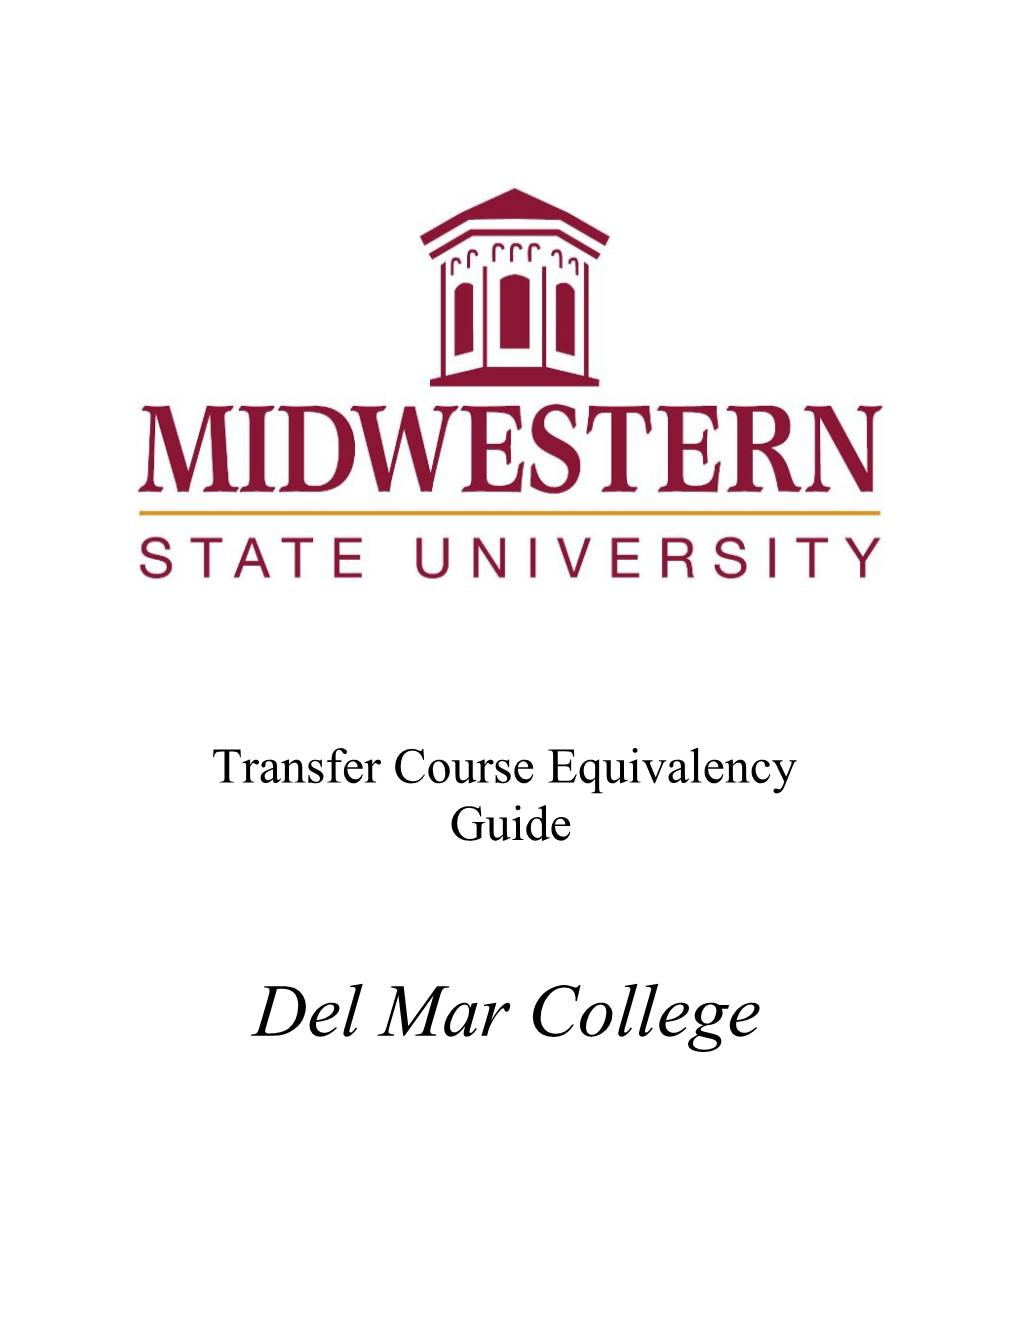 Use This Checklist to Mark the Courses Taken at Del Mar College